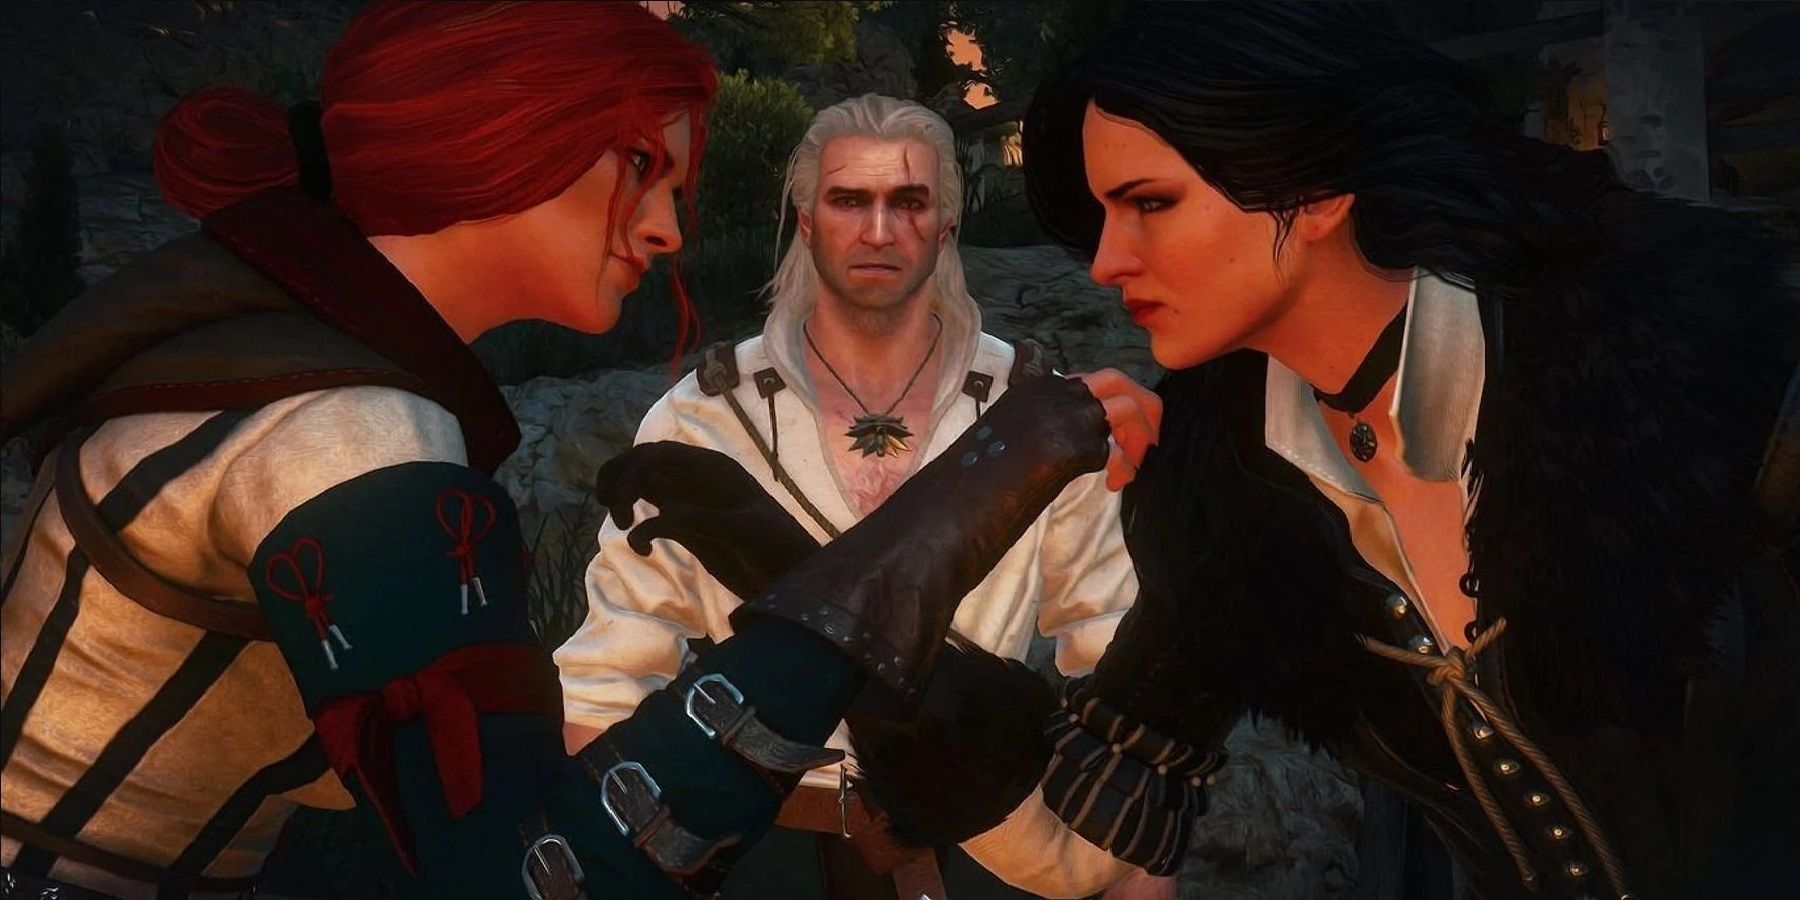 Yennefer and Tris fight over Geralt